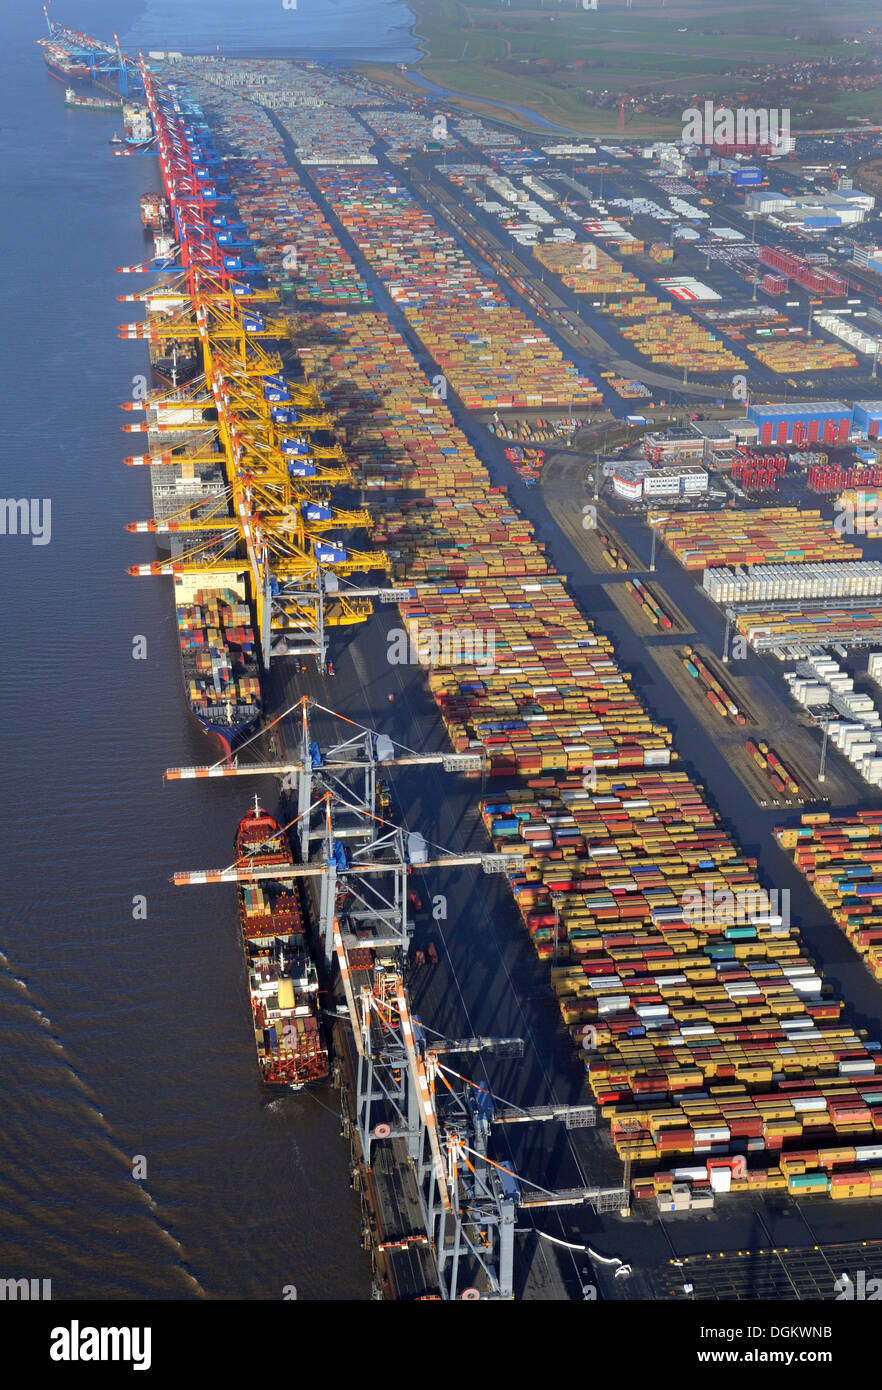 Aerial view, container terminal in the Port of Bremerhaven, Bremerhaven, Bremerhaven, Bremen, Germany Stock Photo